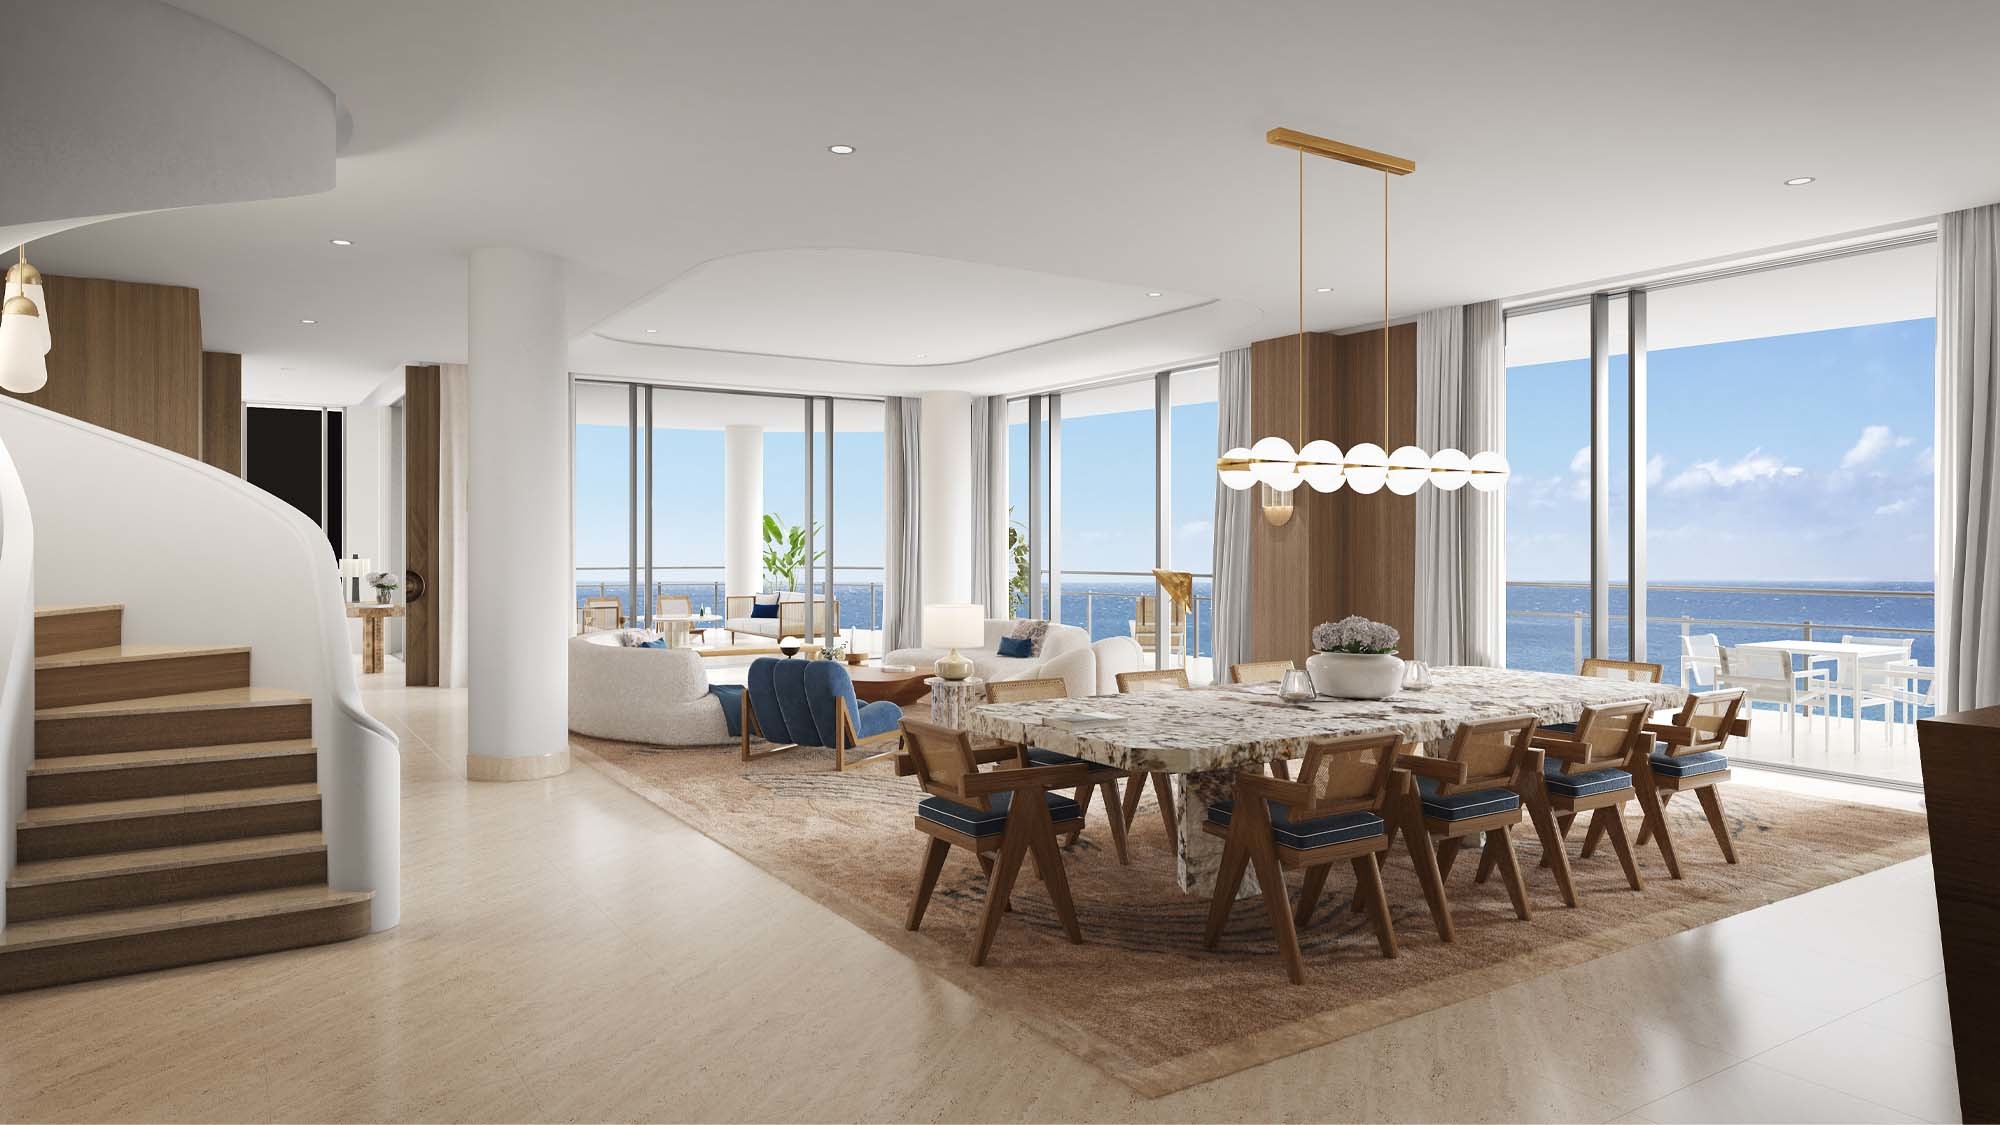 BEHIND THE DESIGN OF THE NEW FOUR SEASONS HOTEL AND RESIDENCES FORT LAUDERDALE